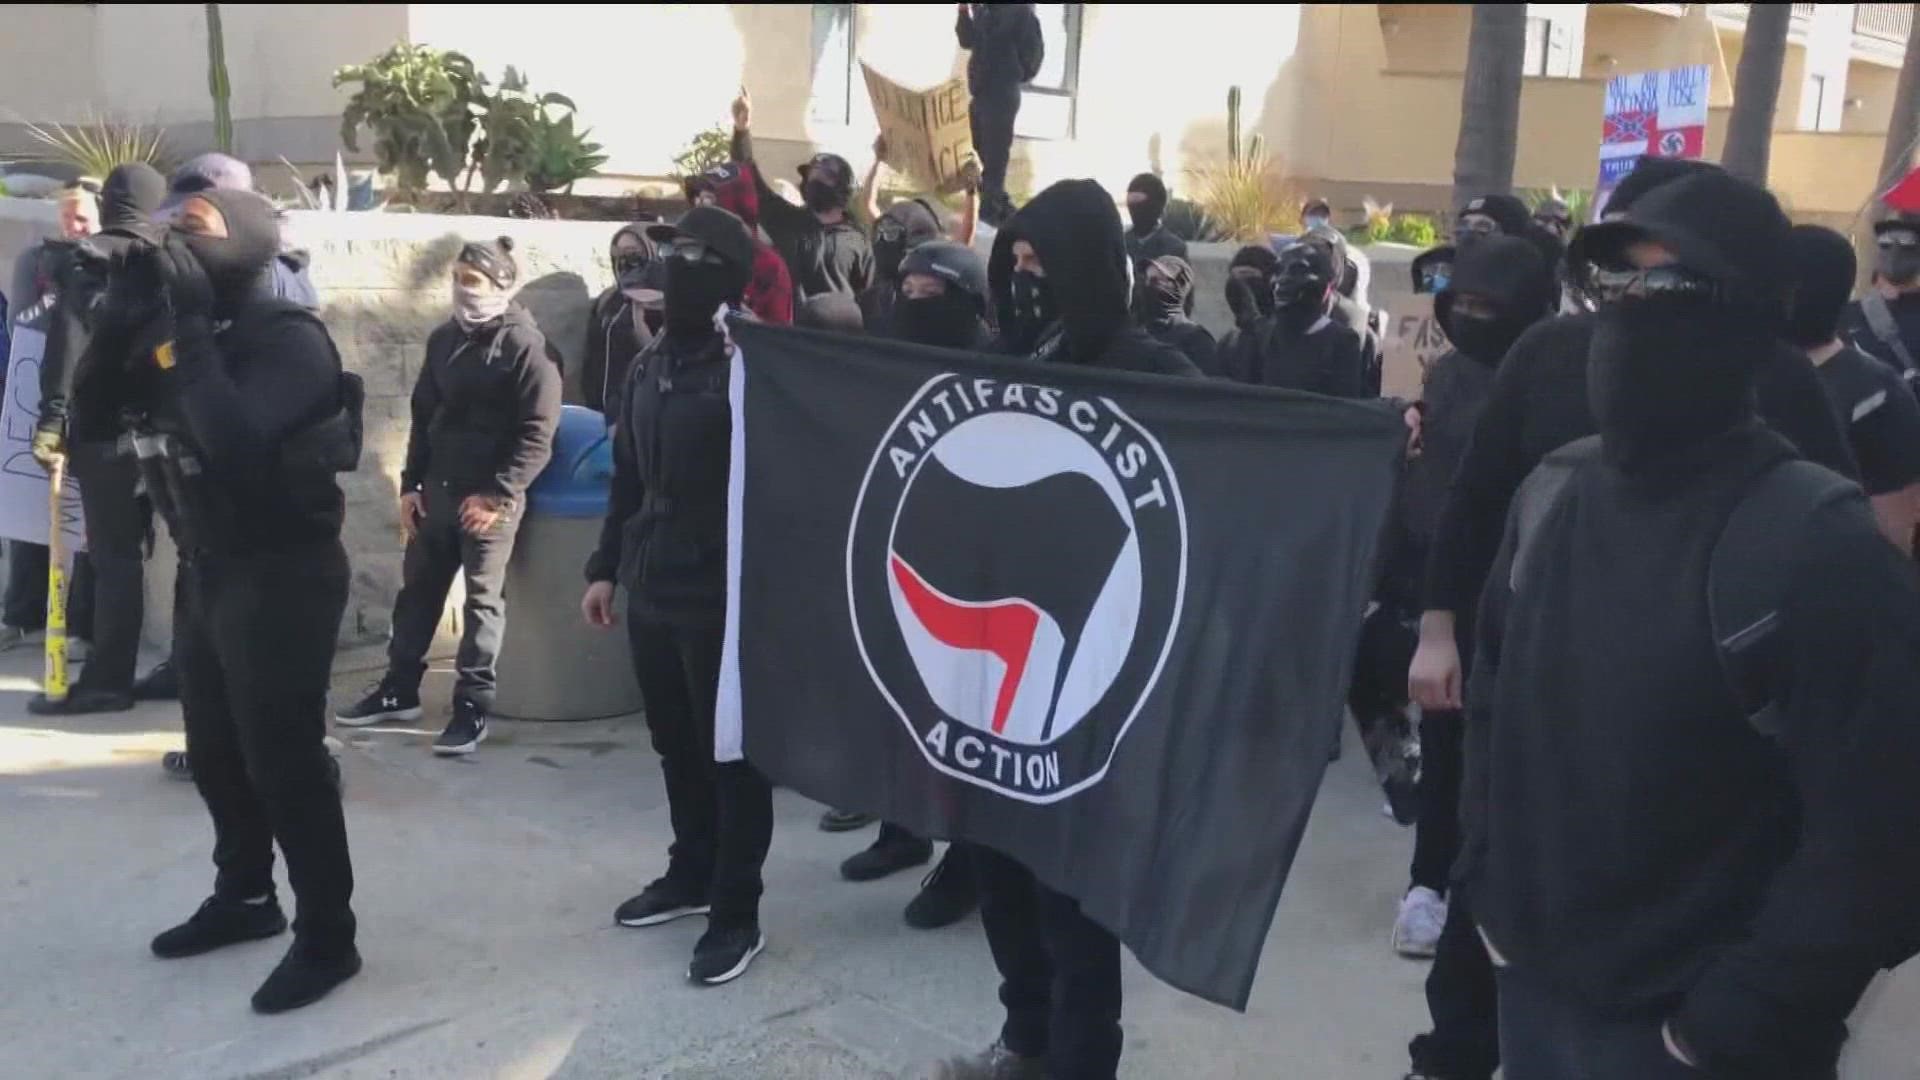 Prosecutors arrested 11 people, who they say are associated with Antifa, an anti-fascist group.